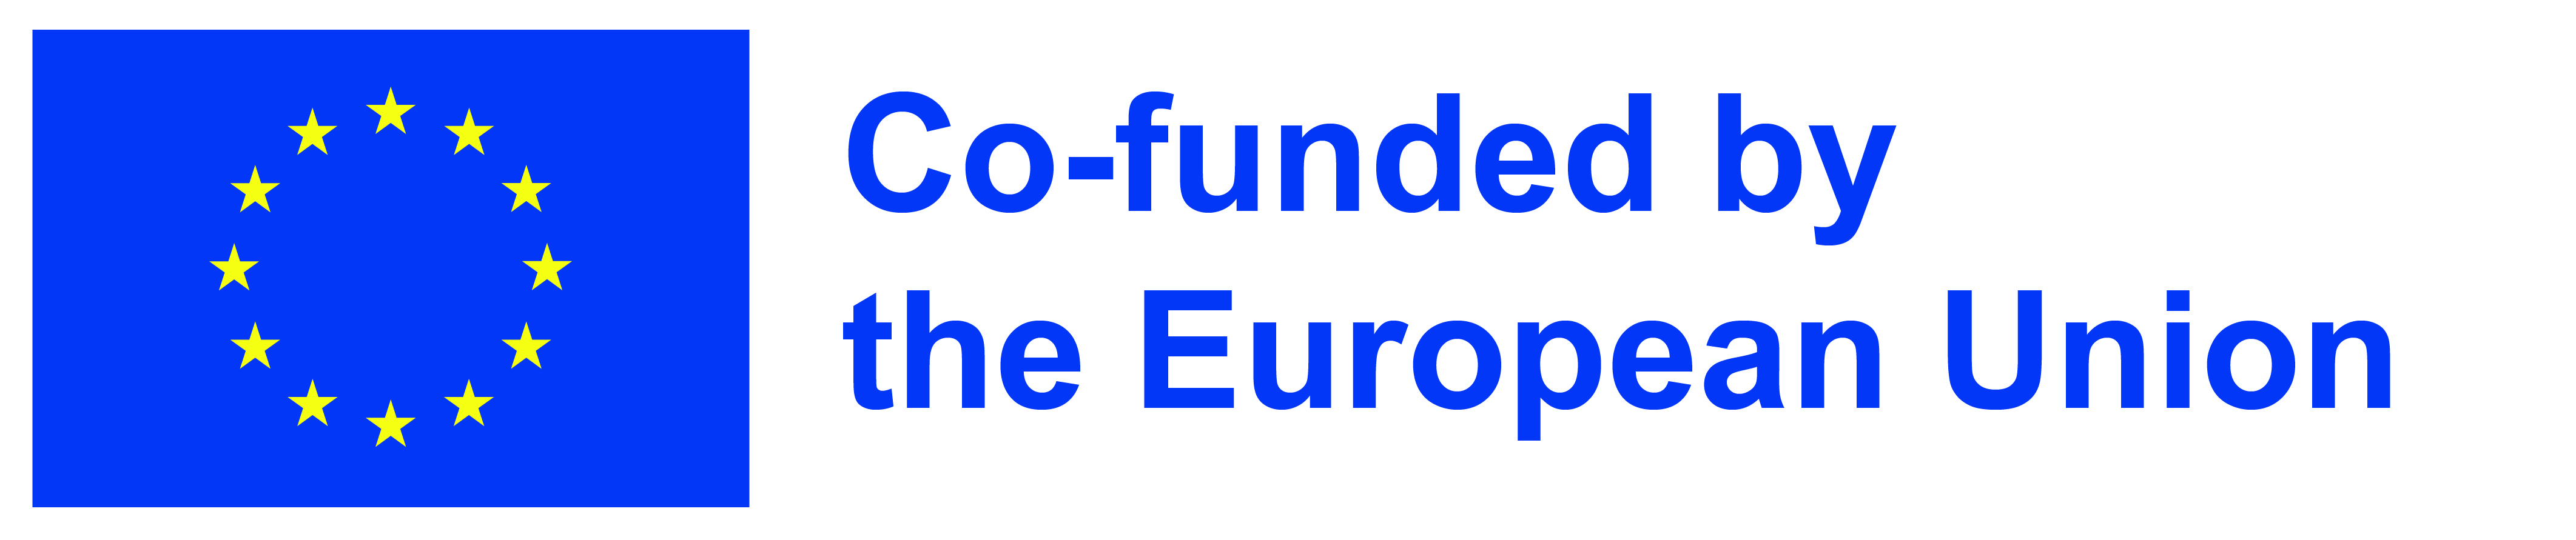 EU flag and co-funded text